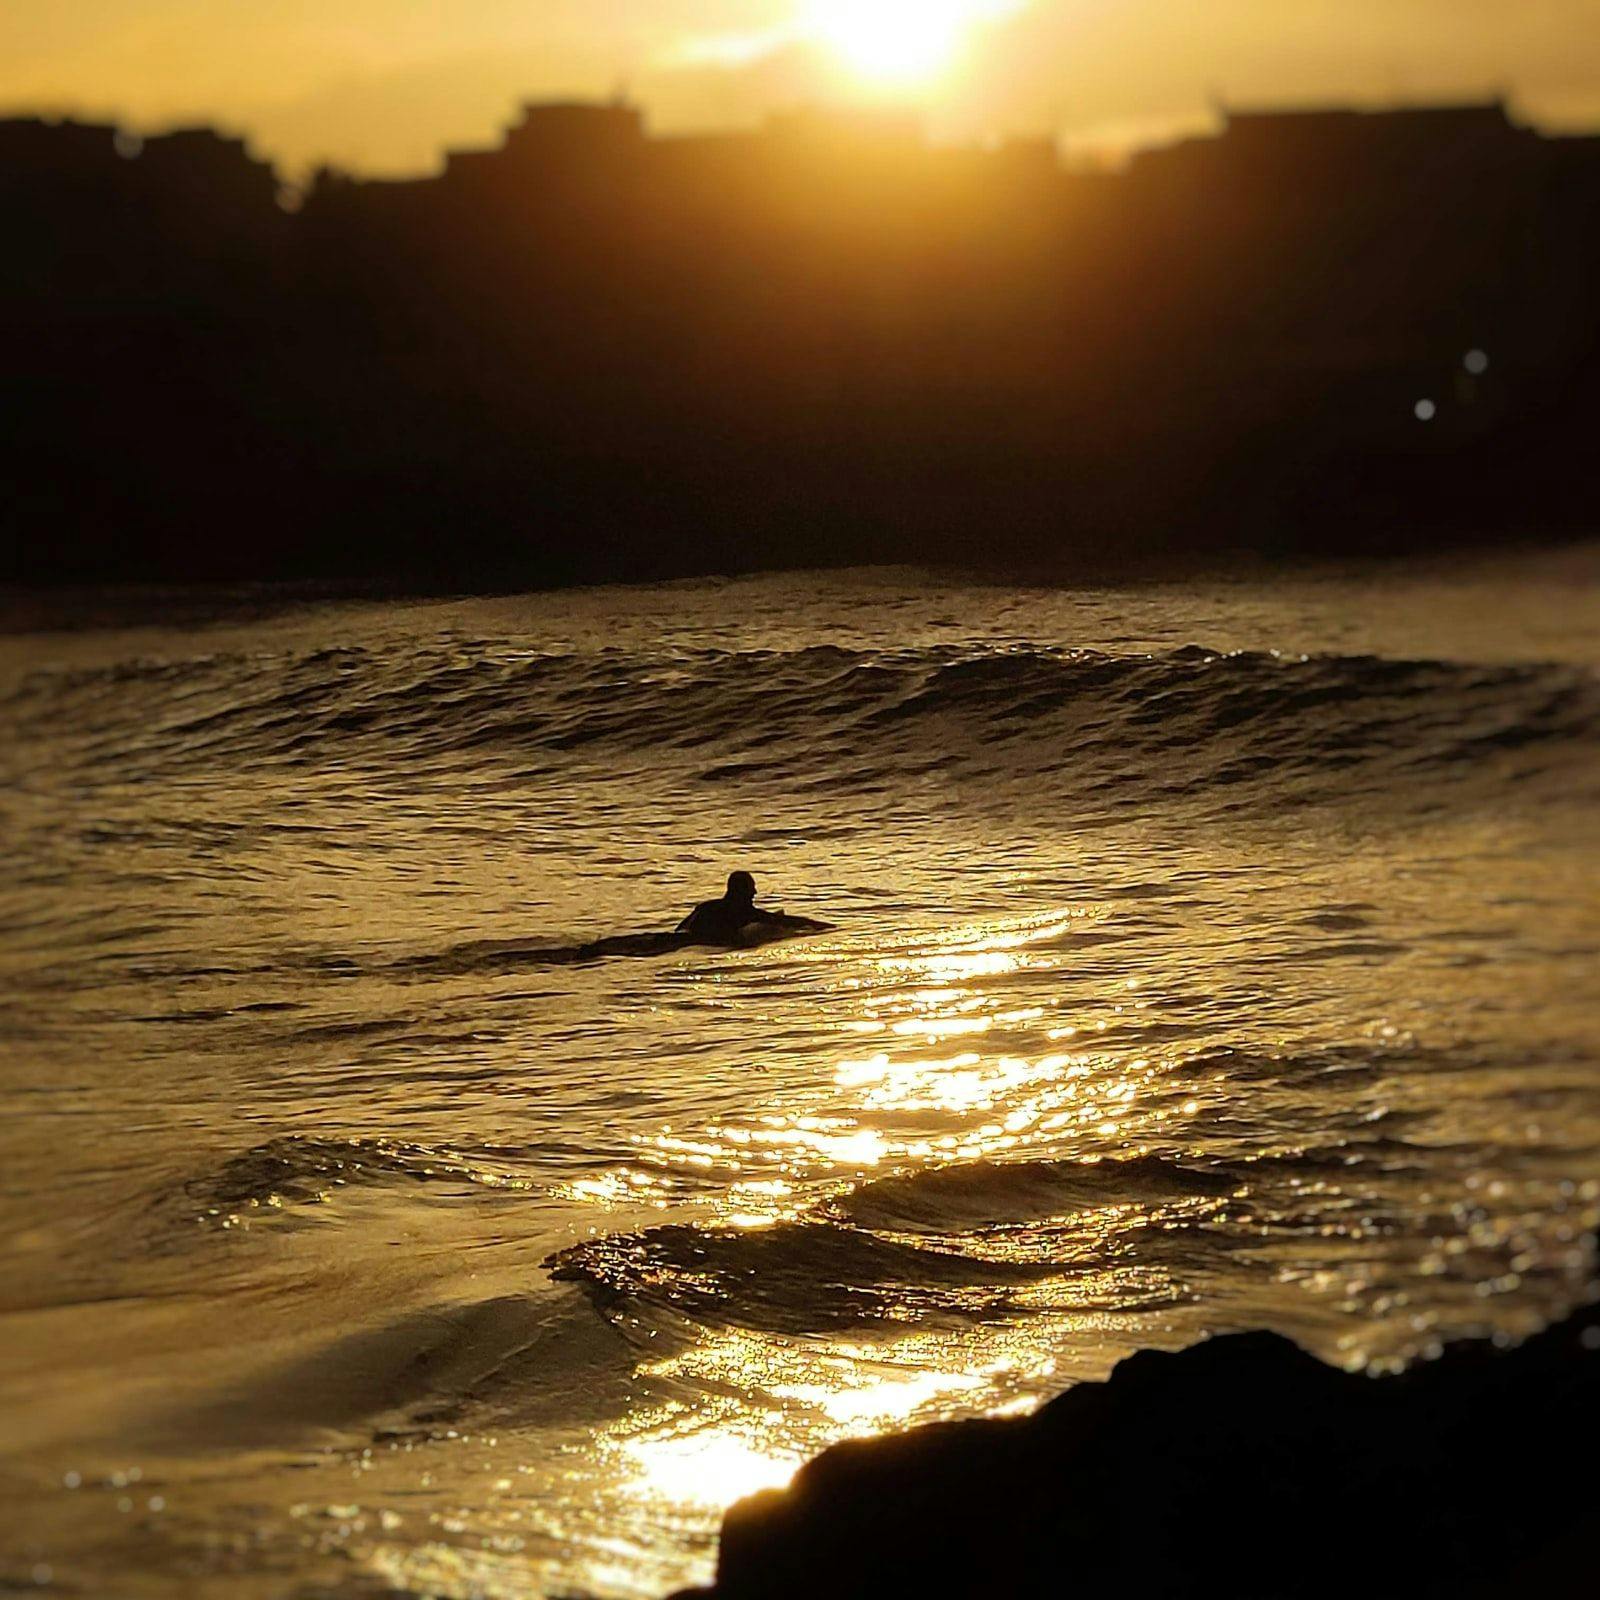 Coworking, Coliving and Surfing in Tenerife (Spain)